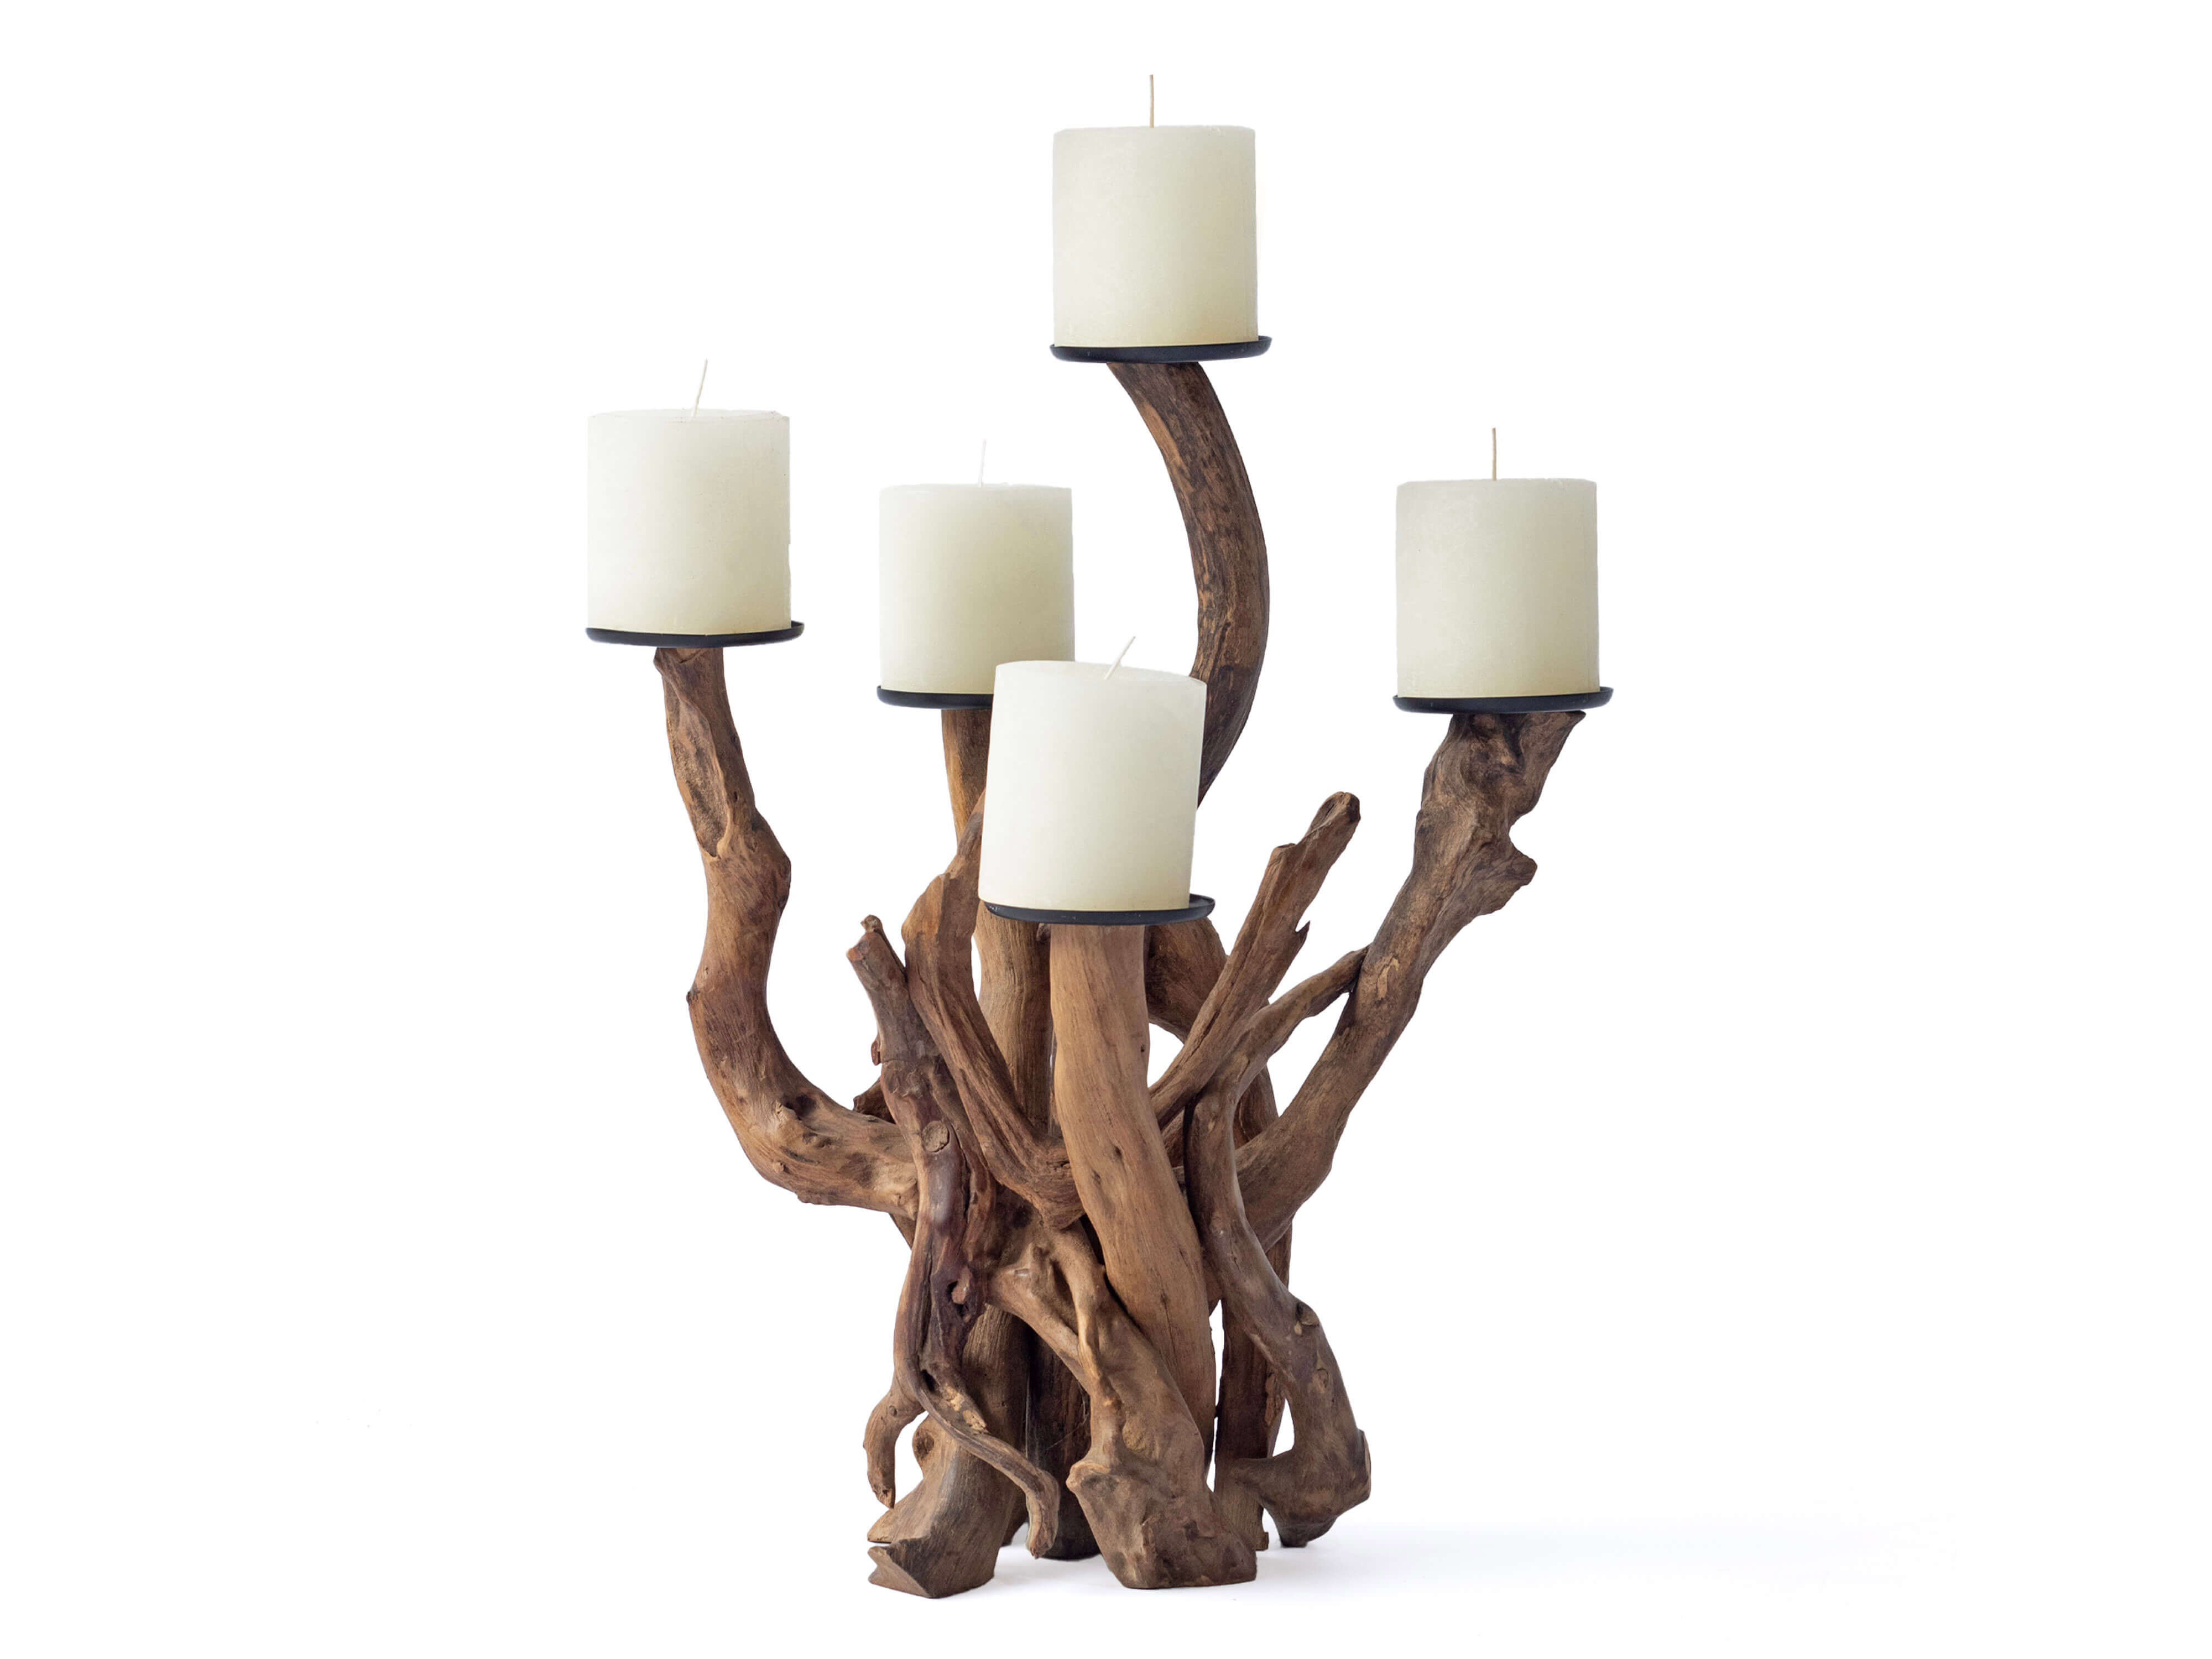 5 Cup Natural Waxed Candelabra - NOTE CANDLES NOT INCLUDED